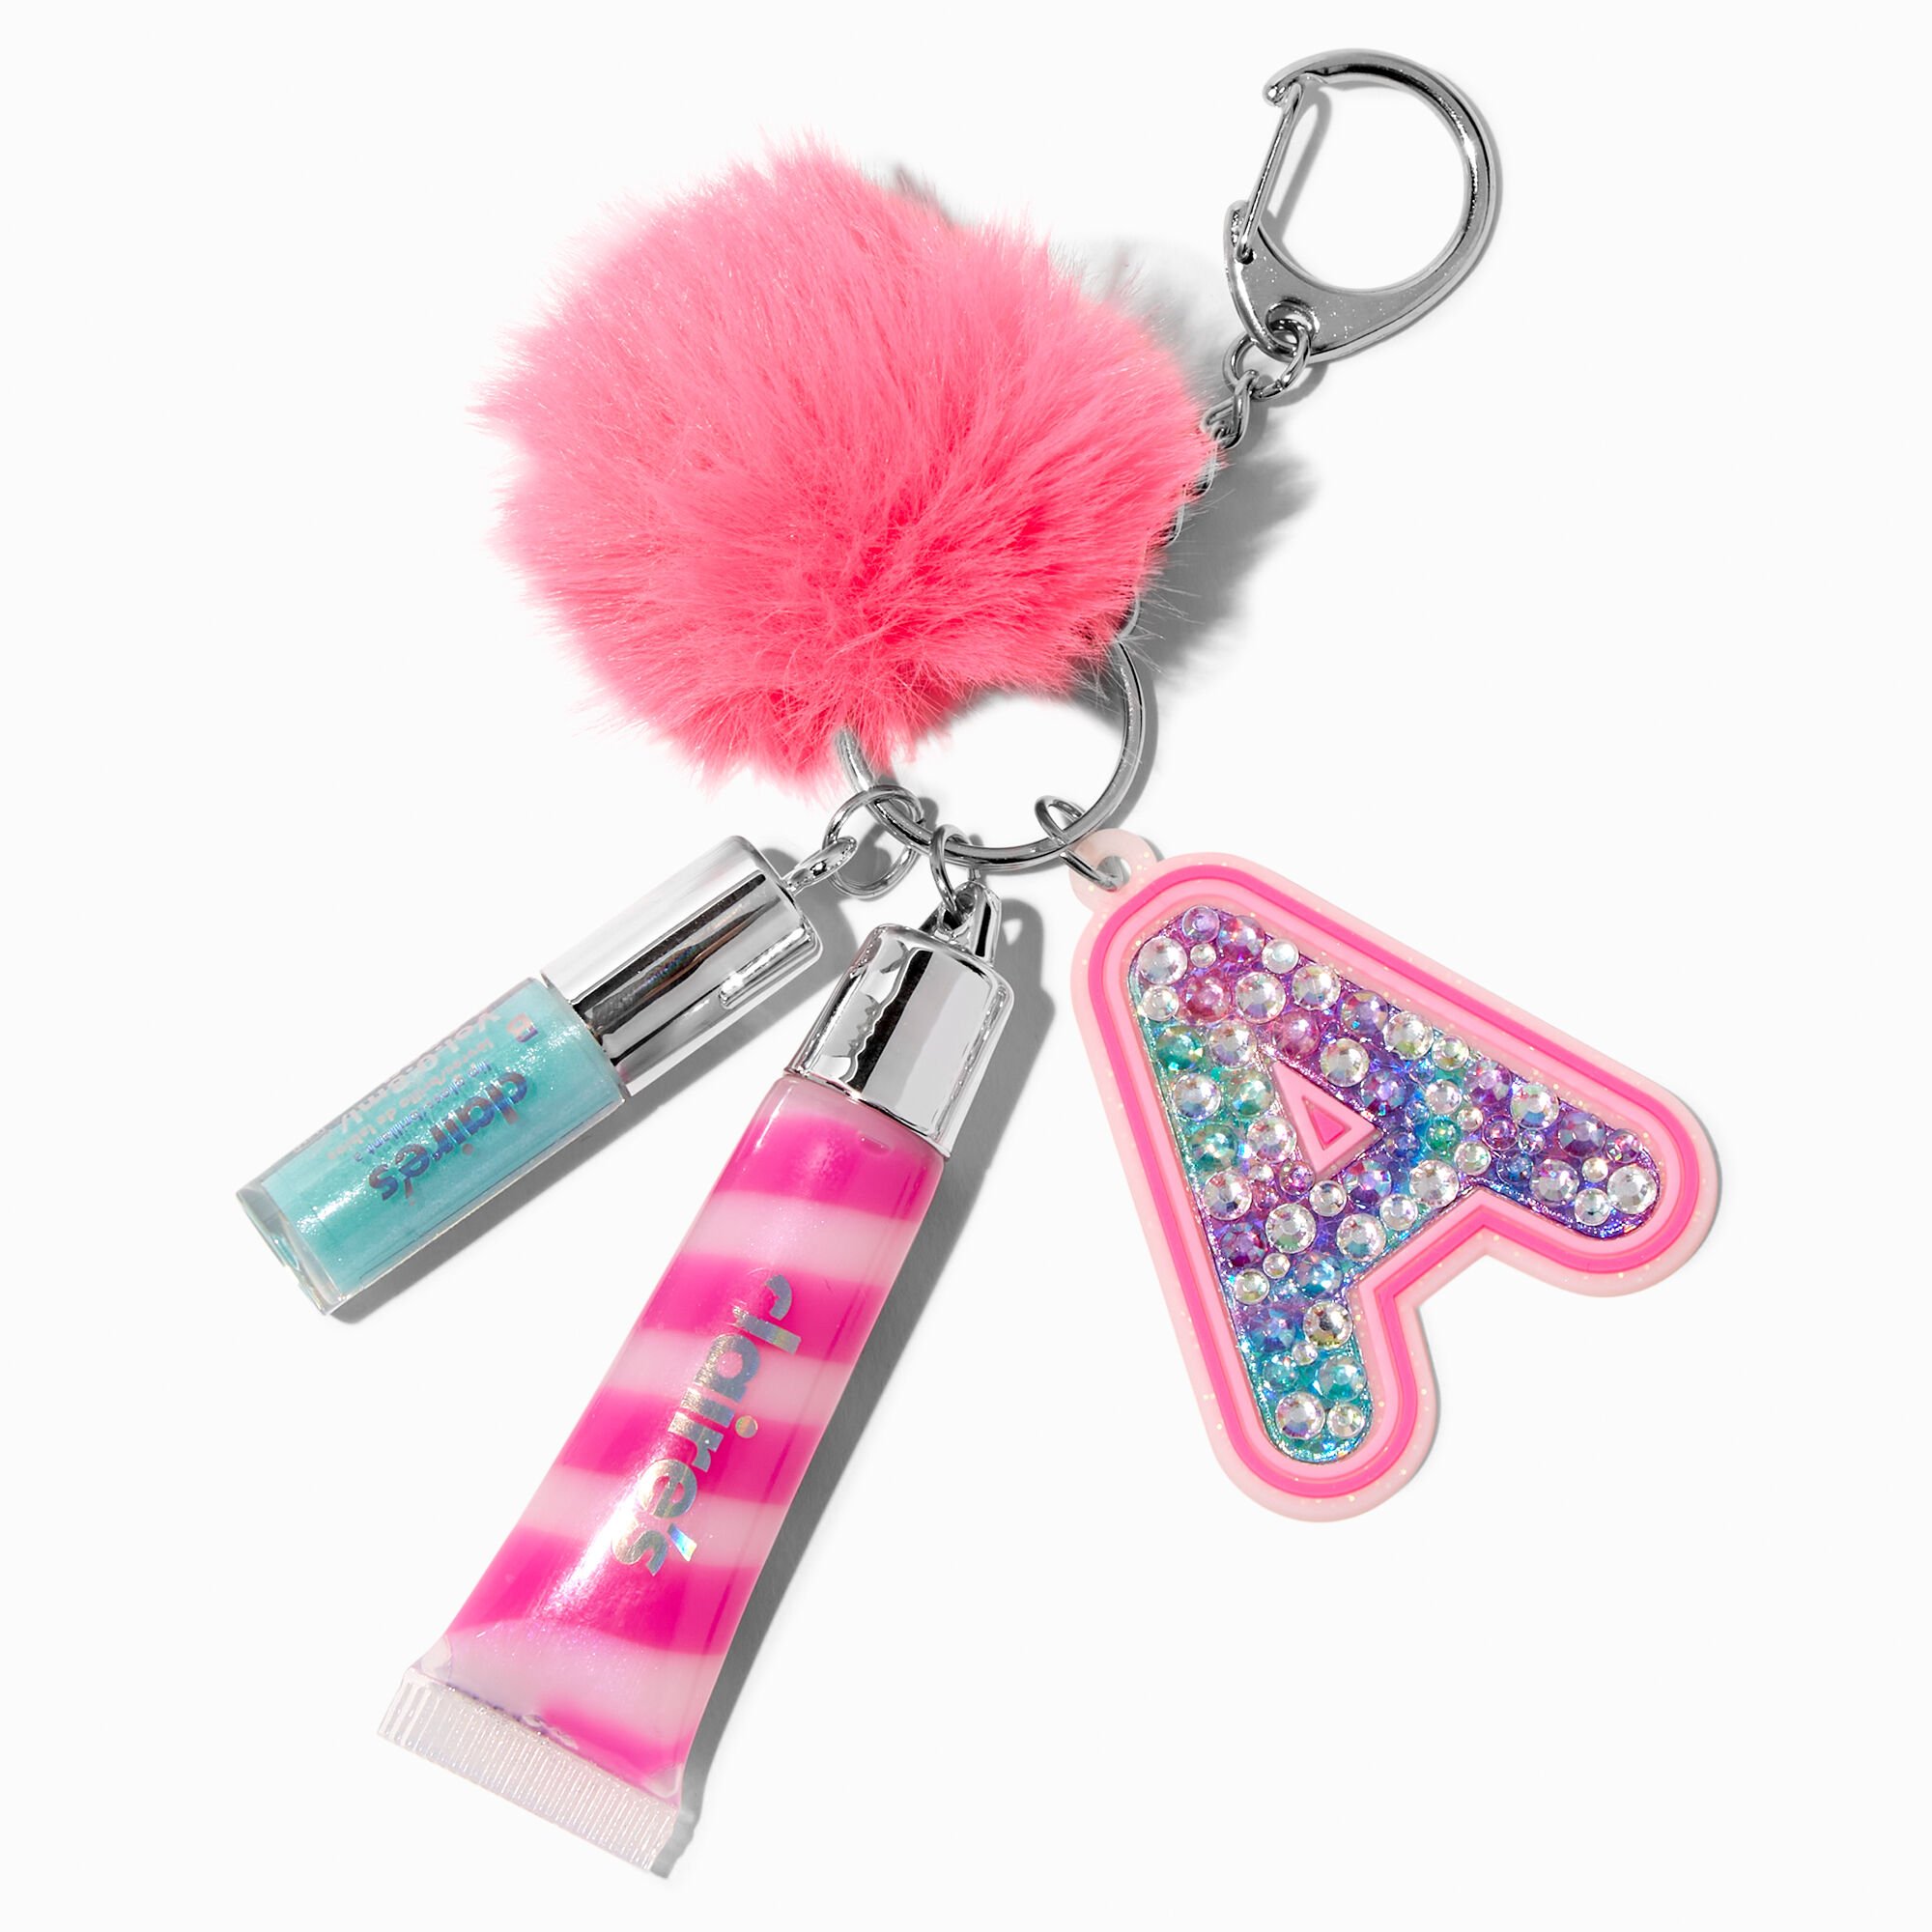 Resin Keychain Initial Keychains Music Keychains Lipgloss